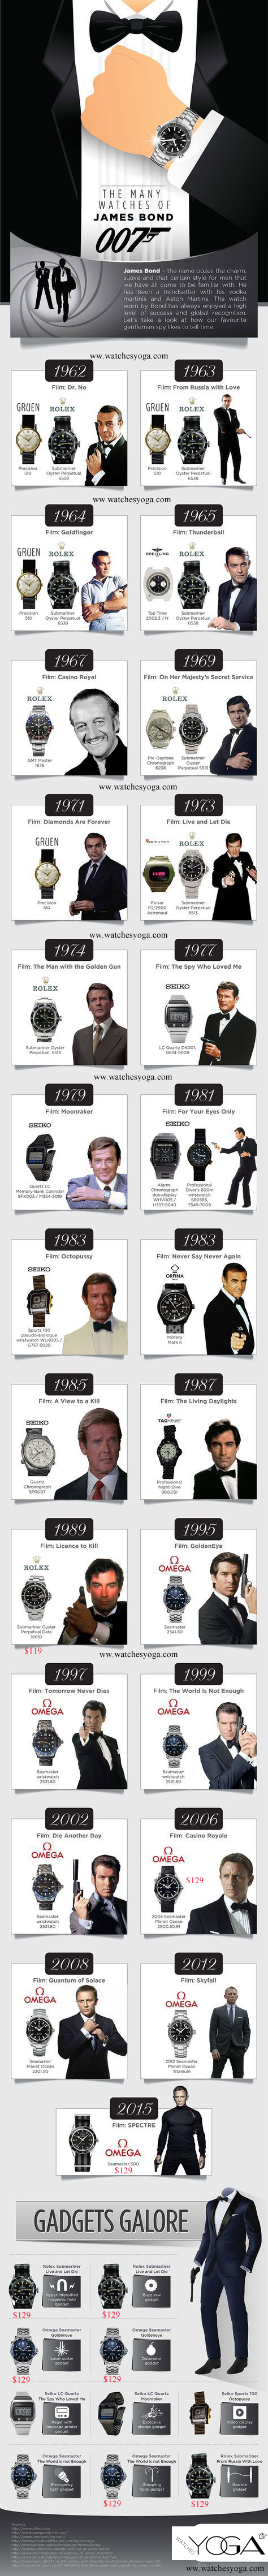 infographic The luxury replica watches of James bond 007 you will like